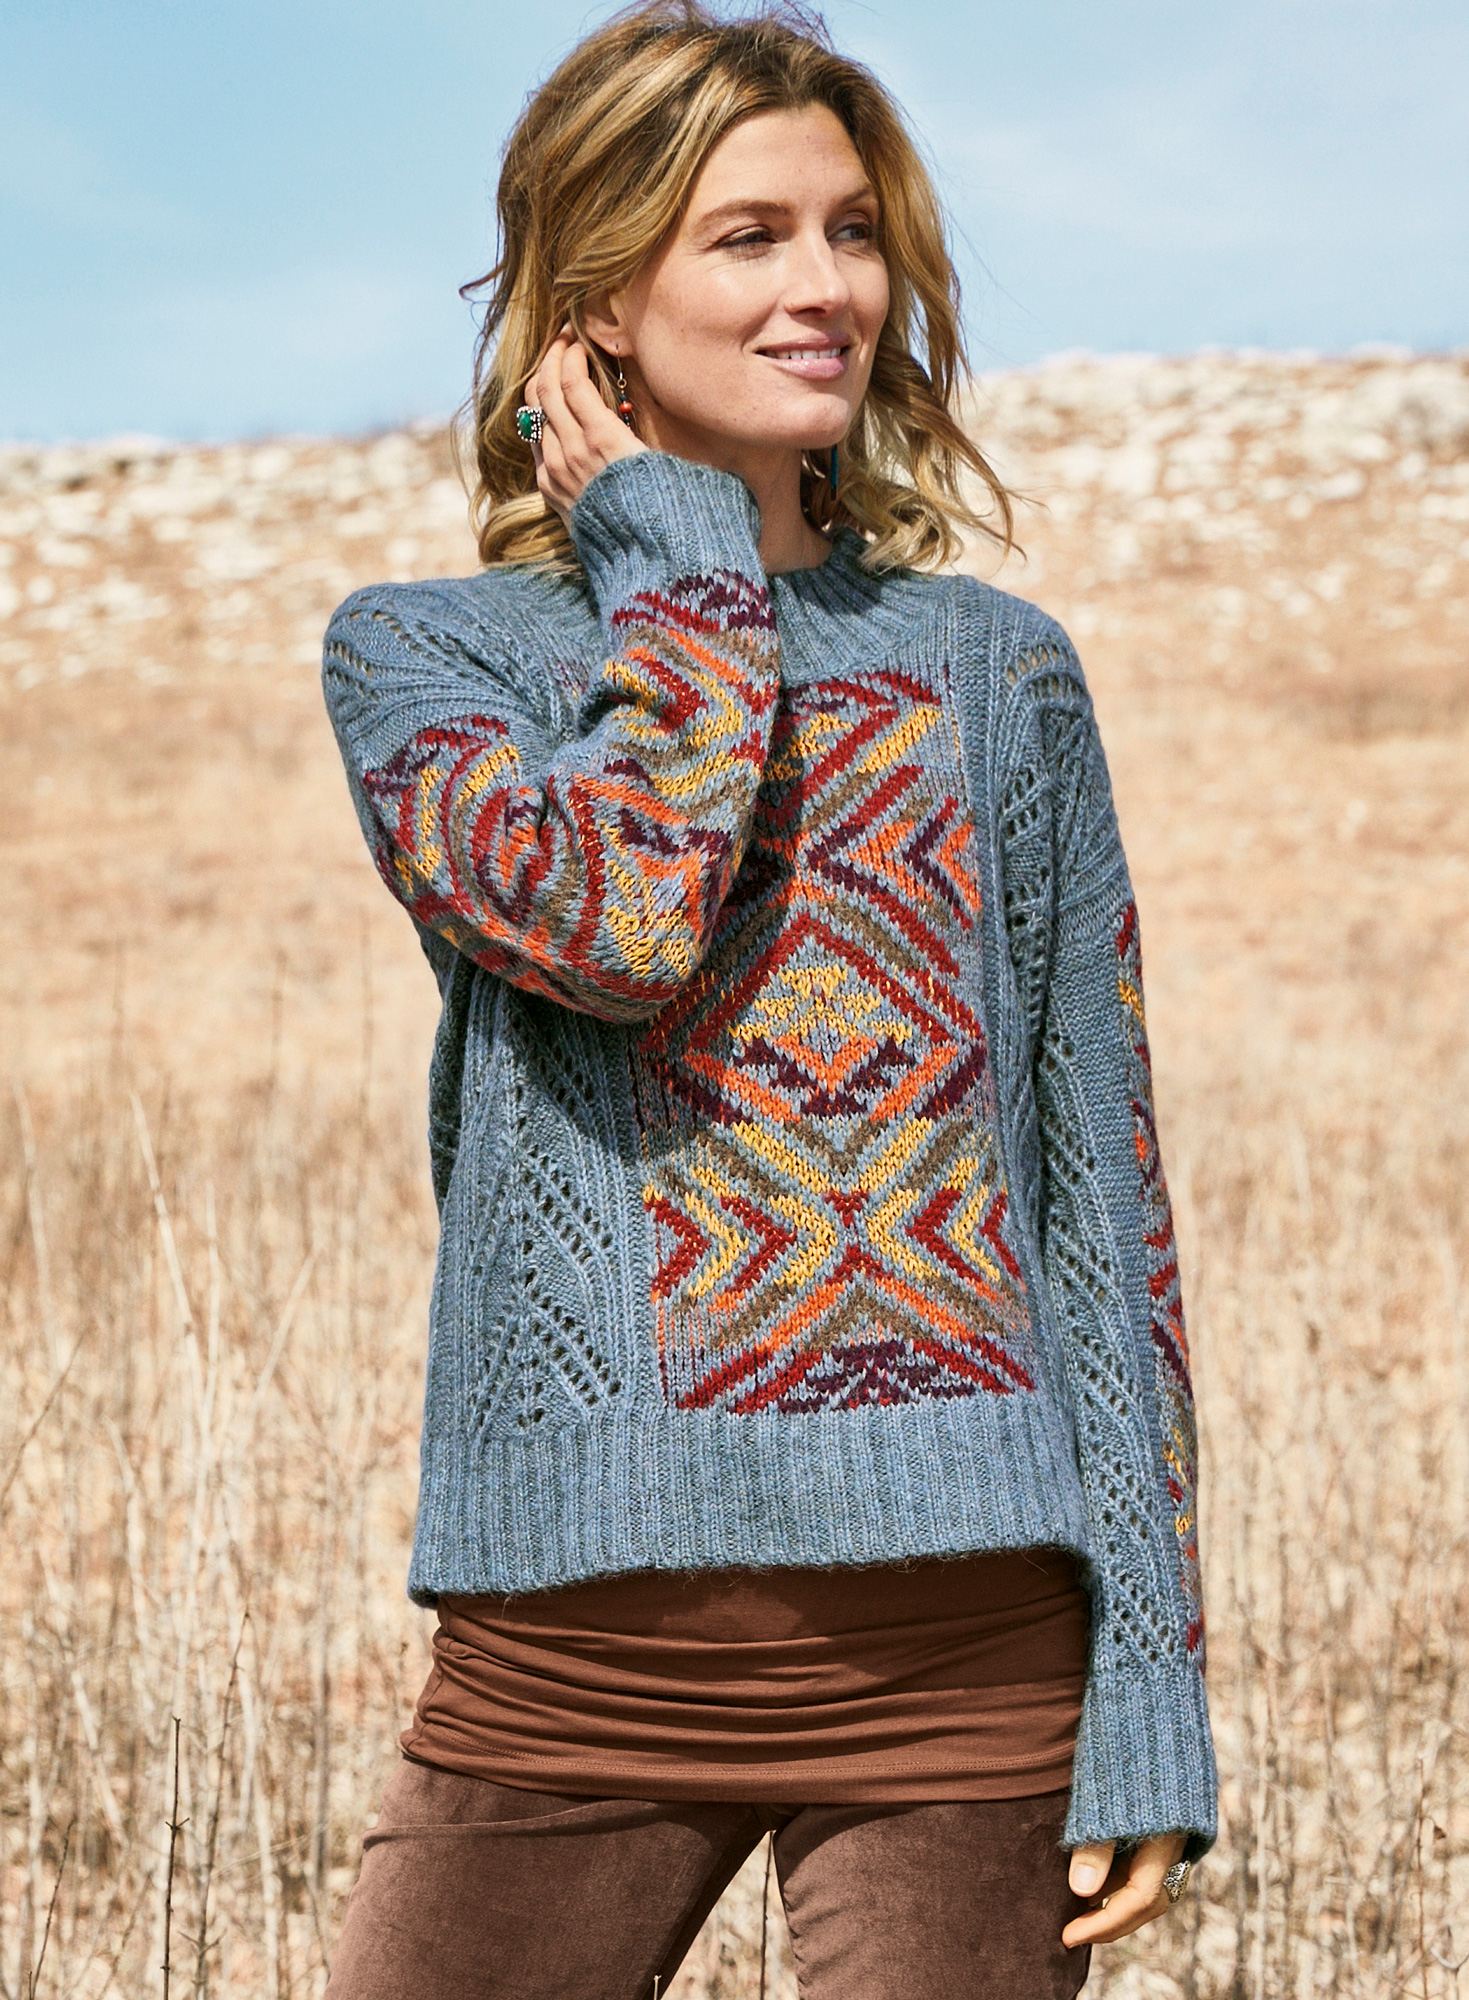 9 Ethical, Sustainable Knitwear Brands to Know